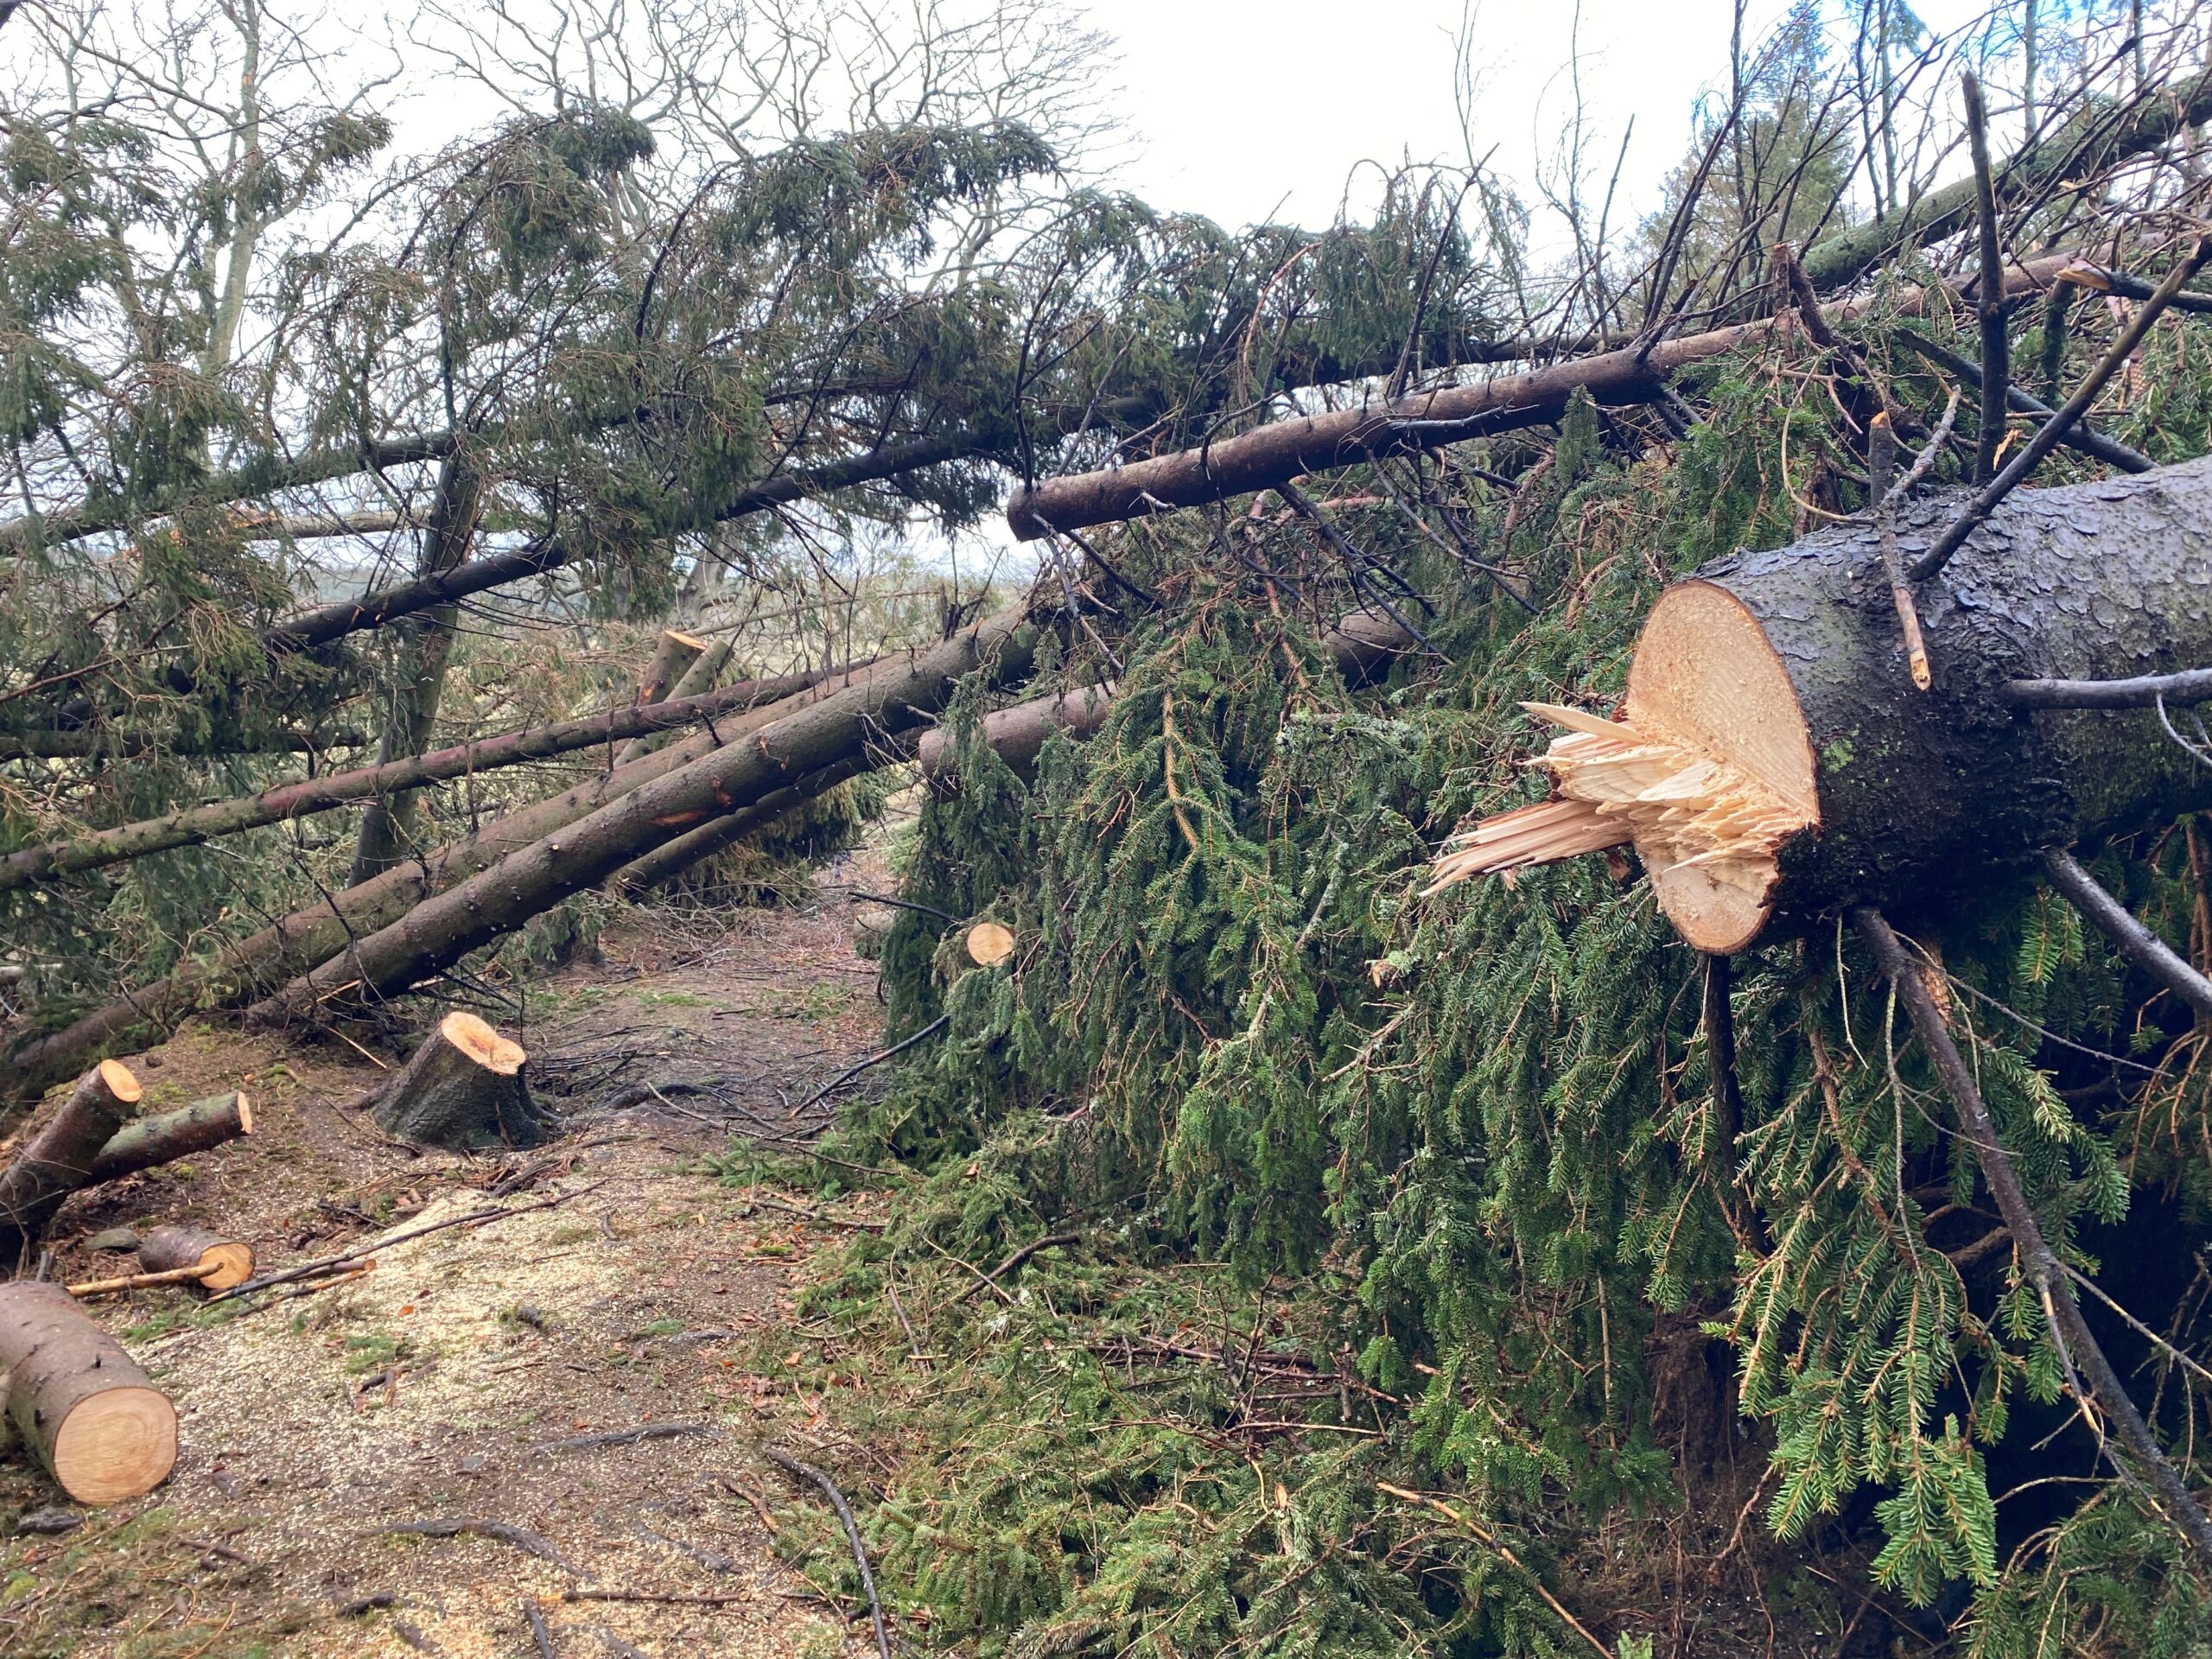 Scottish Forestry and the forestry sector have pulled together “magnificently” to tackle the Felling Permissions that were needed after the winter storms.